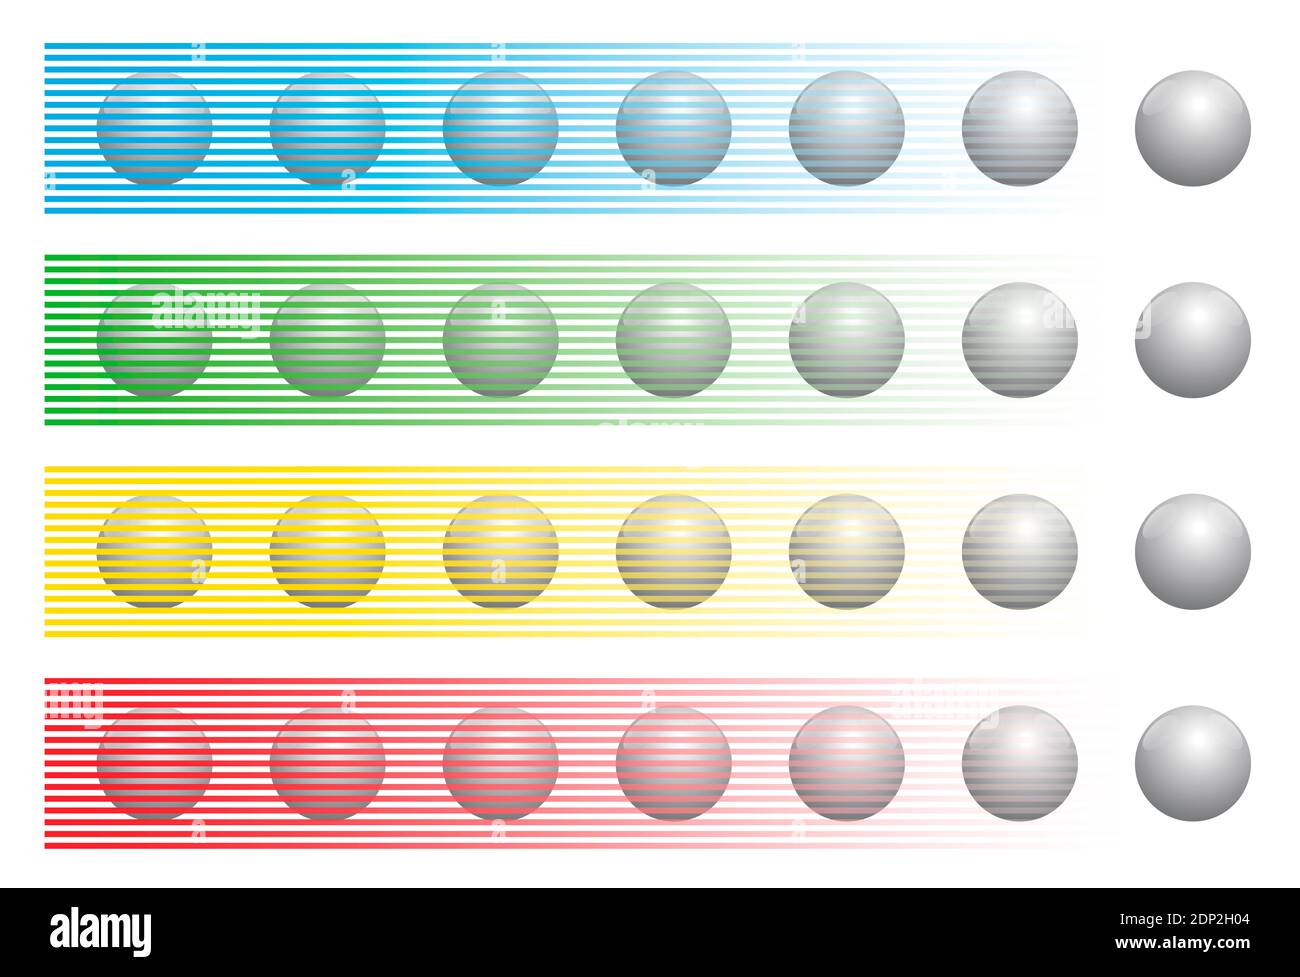 Optical illusion with balls of the same color behind different colored stripes, known as Munker-White illusion. Stock Photo